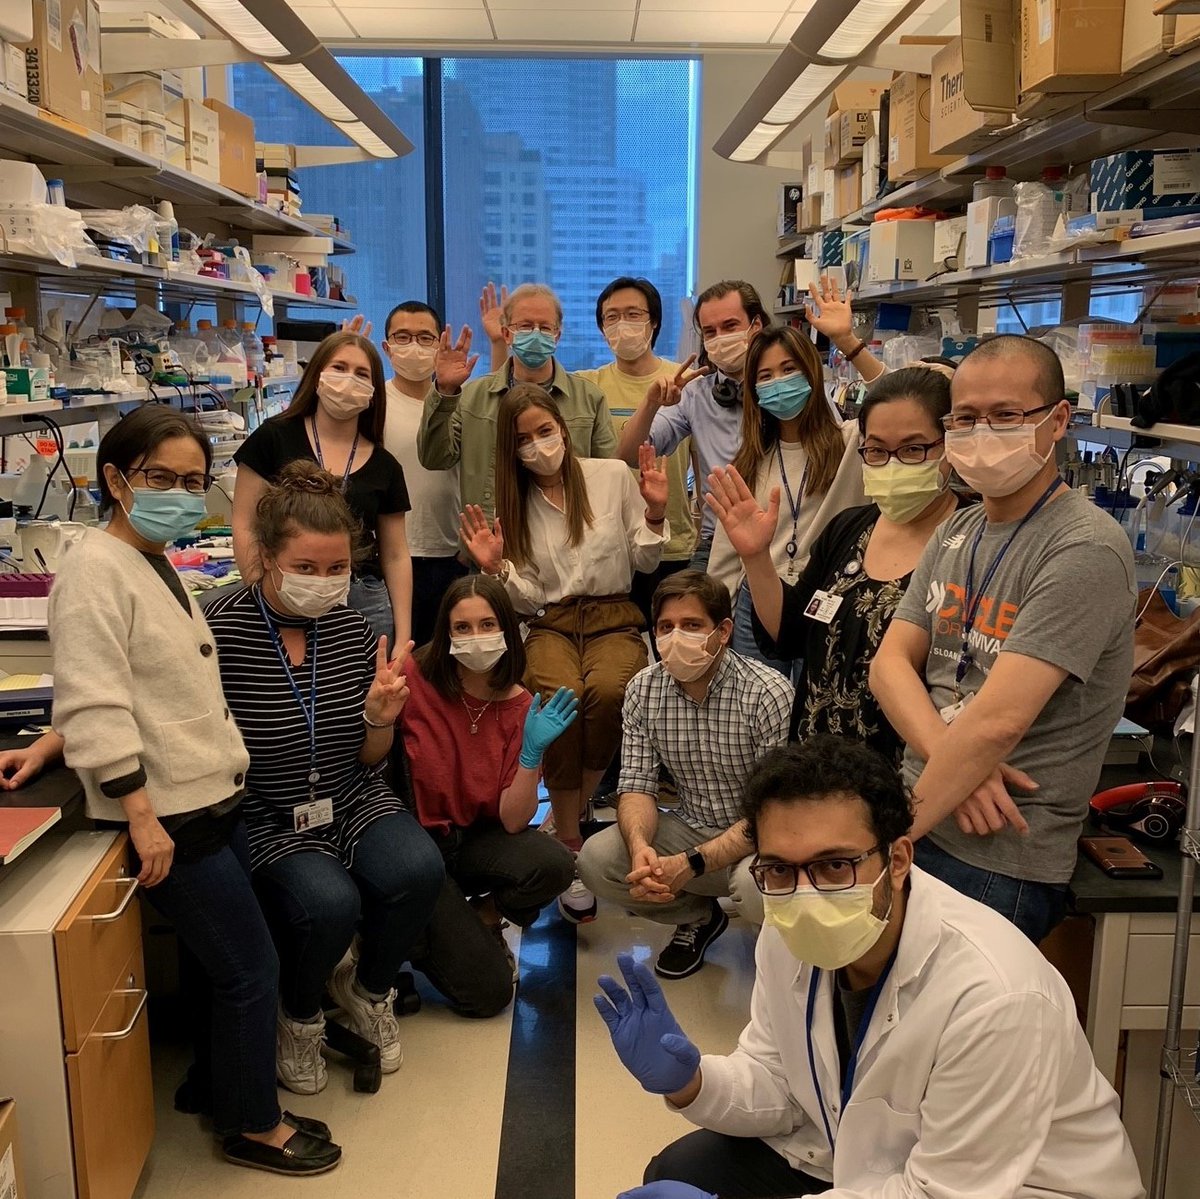 May is #NationalCancerResearchMonth. @SawyersLabMSKCC joins the @AACR in celebrating all who are dedicated to the field of #CancerResearch. #NCRM21 #SawyersLab